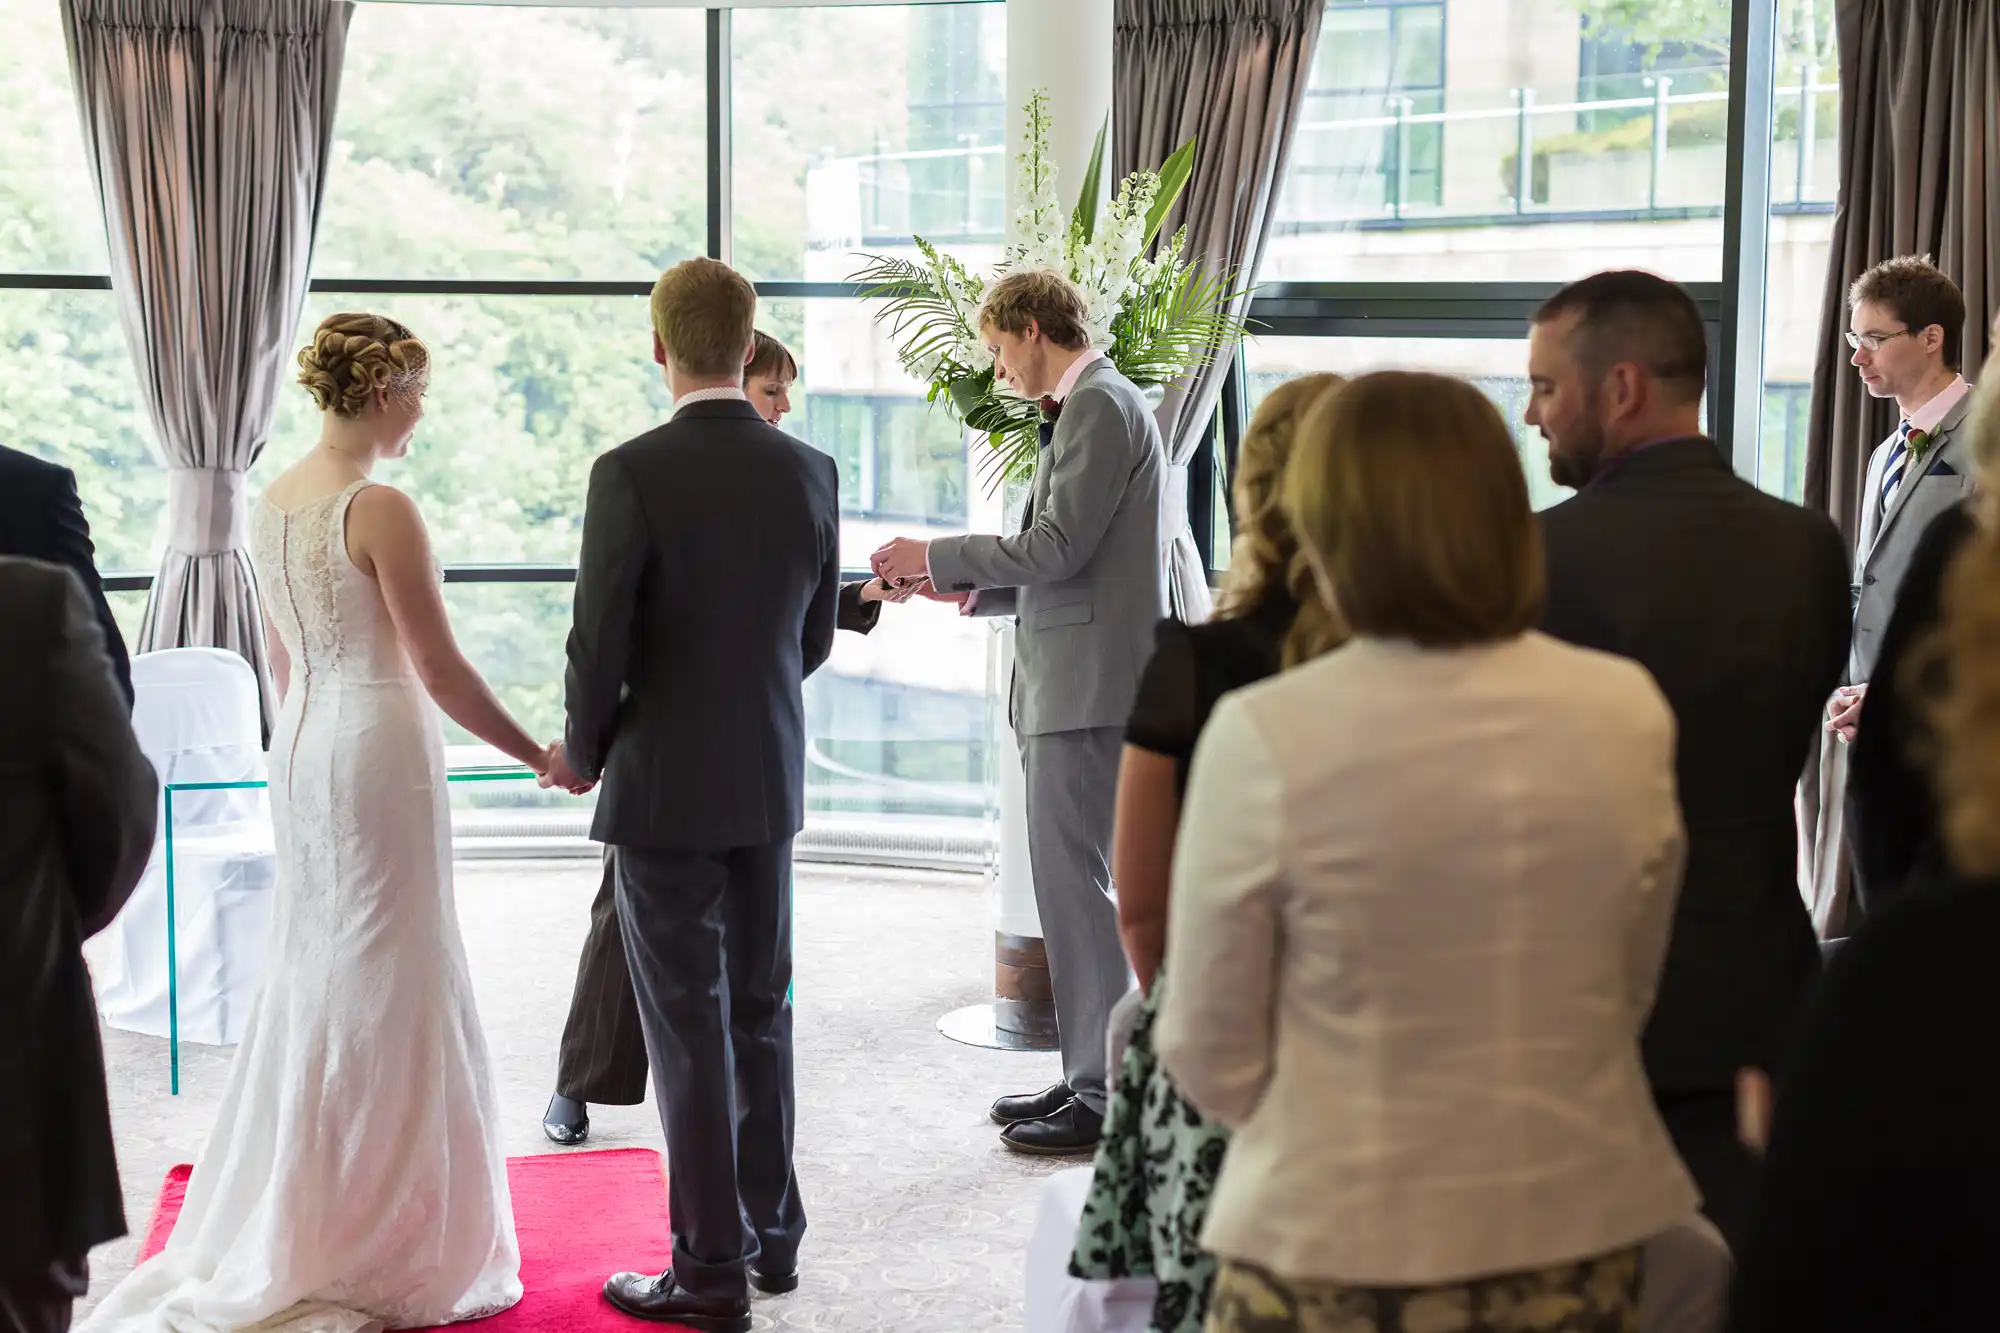 Wedding ceremony in a well-lit room with large windows, where a couple exchanges vows in front of guests.